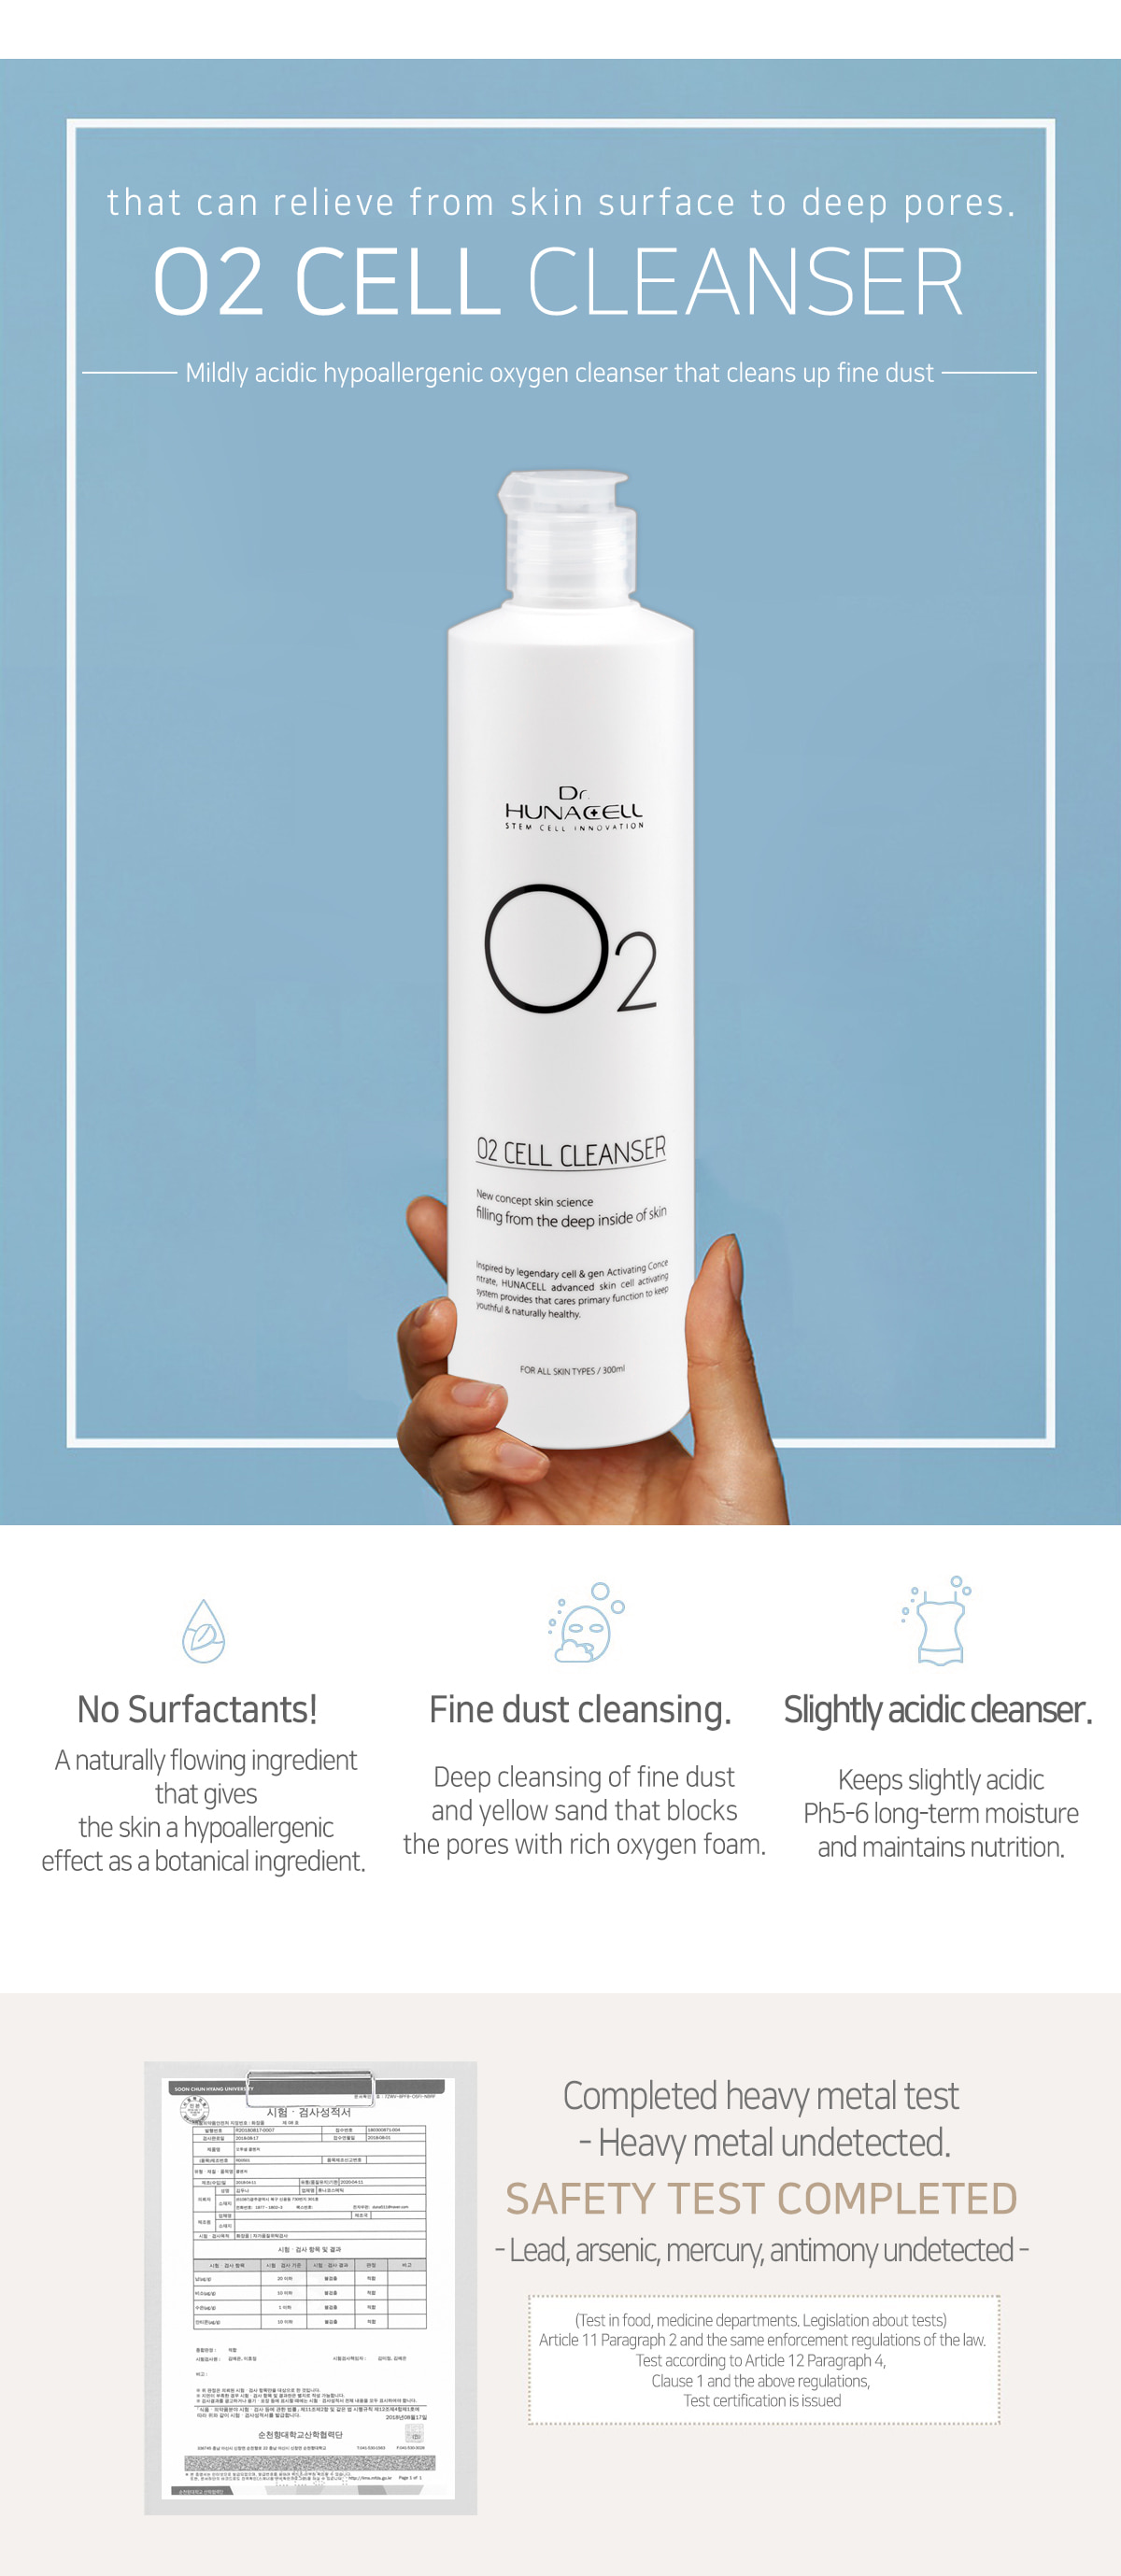 Dr.hunacell - O2 CELL Cleanser (300ml) X100EA FOR B2B Oxygen foam cleansing  foam cleansing  cleansing  Cleanser  Oxygen foam cleanser  foam cleanser  Fine dust cleanser